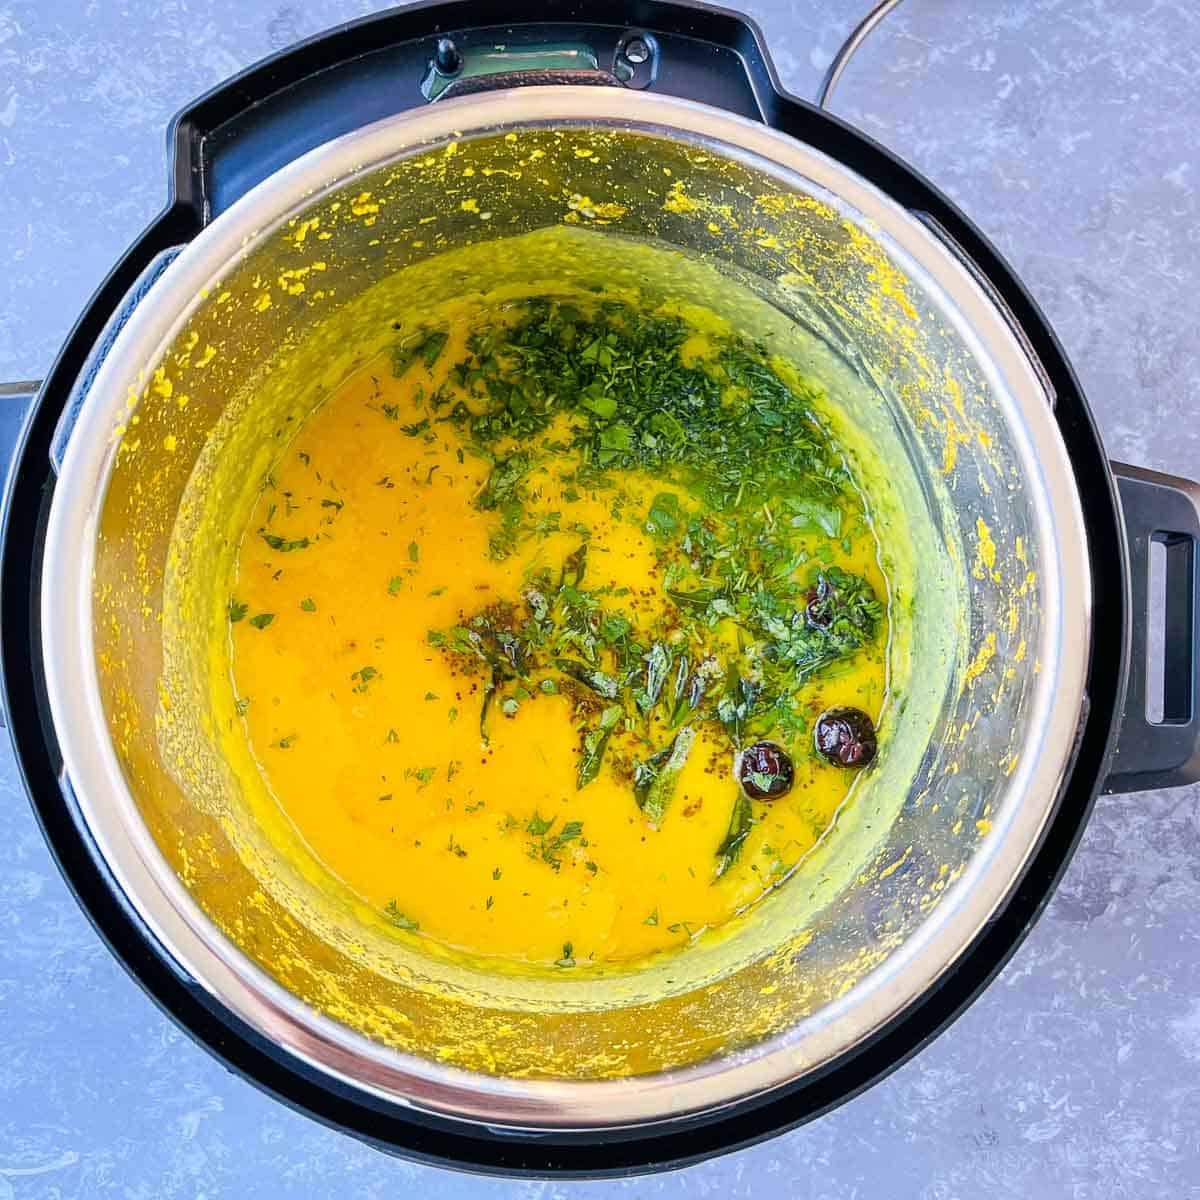 Cilantro and lemon juice garnish on the dal in Instant Pot.